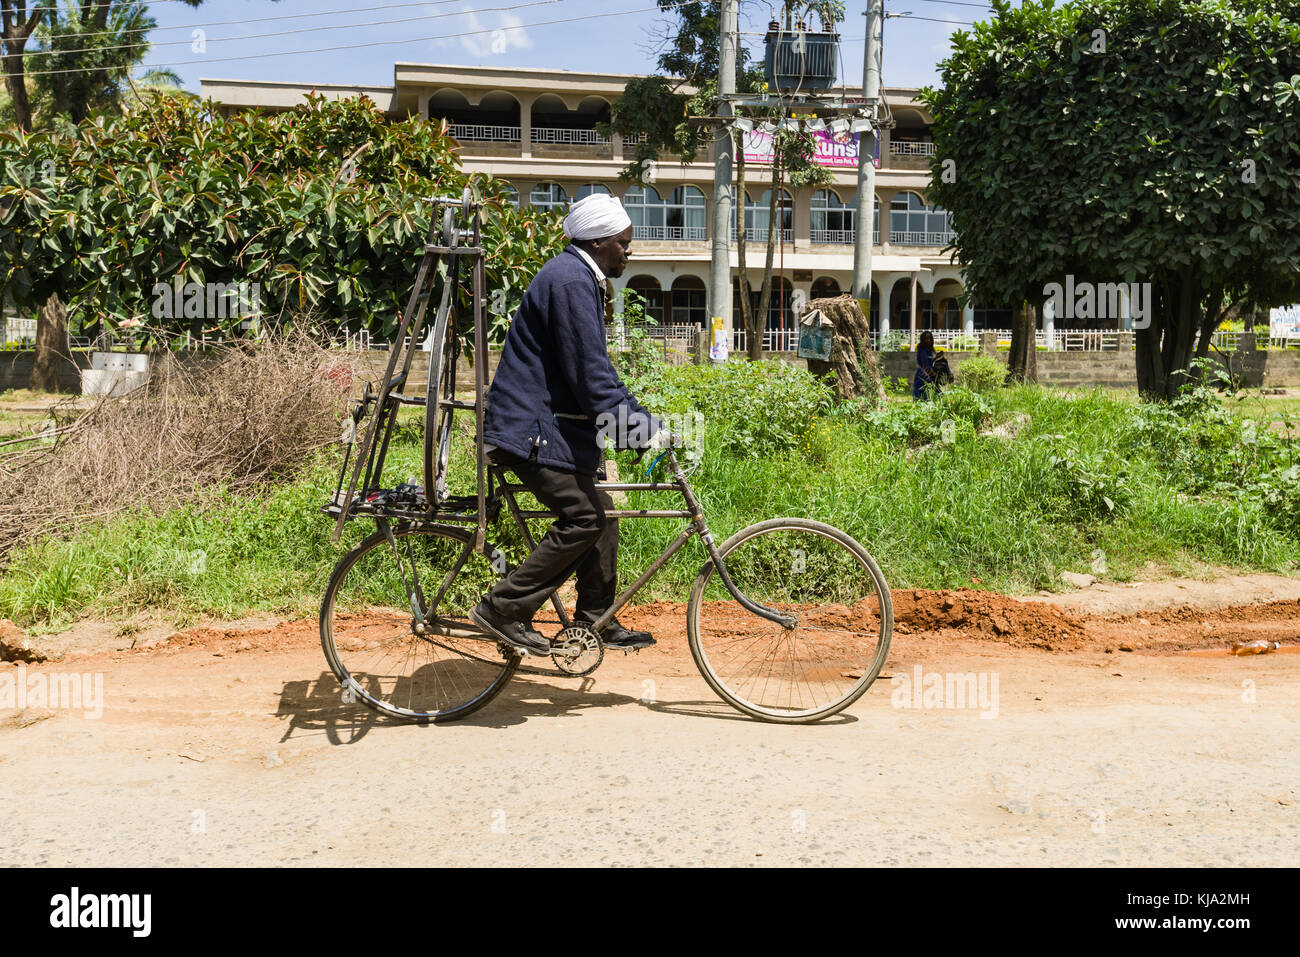 An African man riding on a bicycle with a knife sharpener on the back, Kenya, East Africa Stock Photo